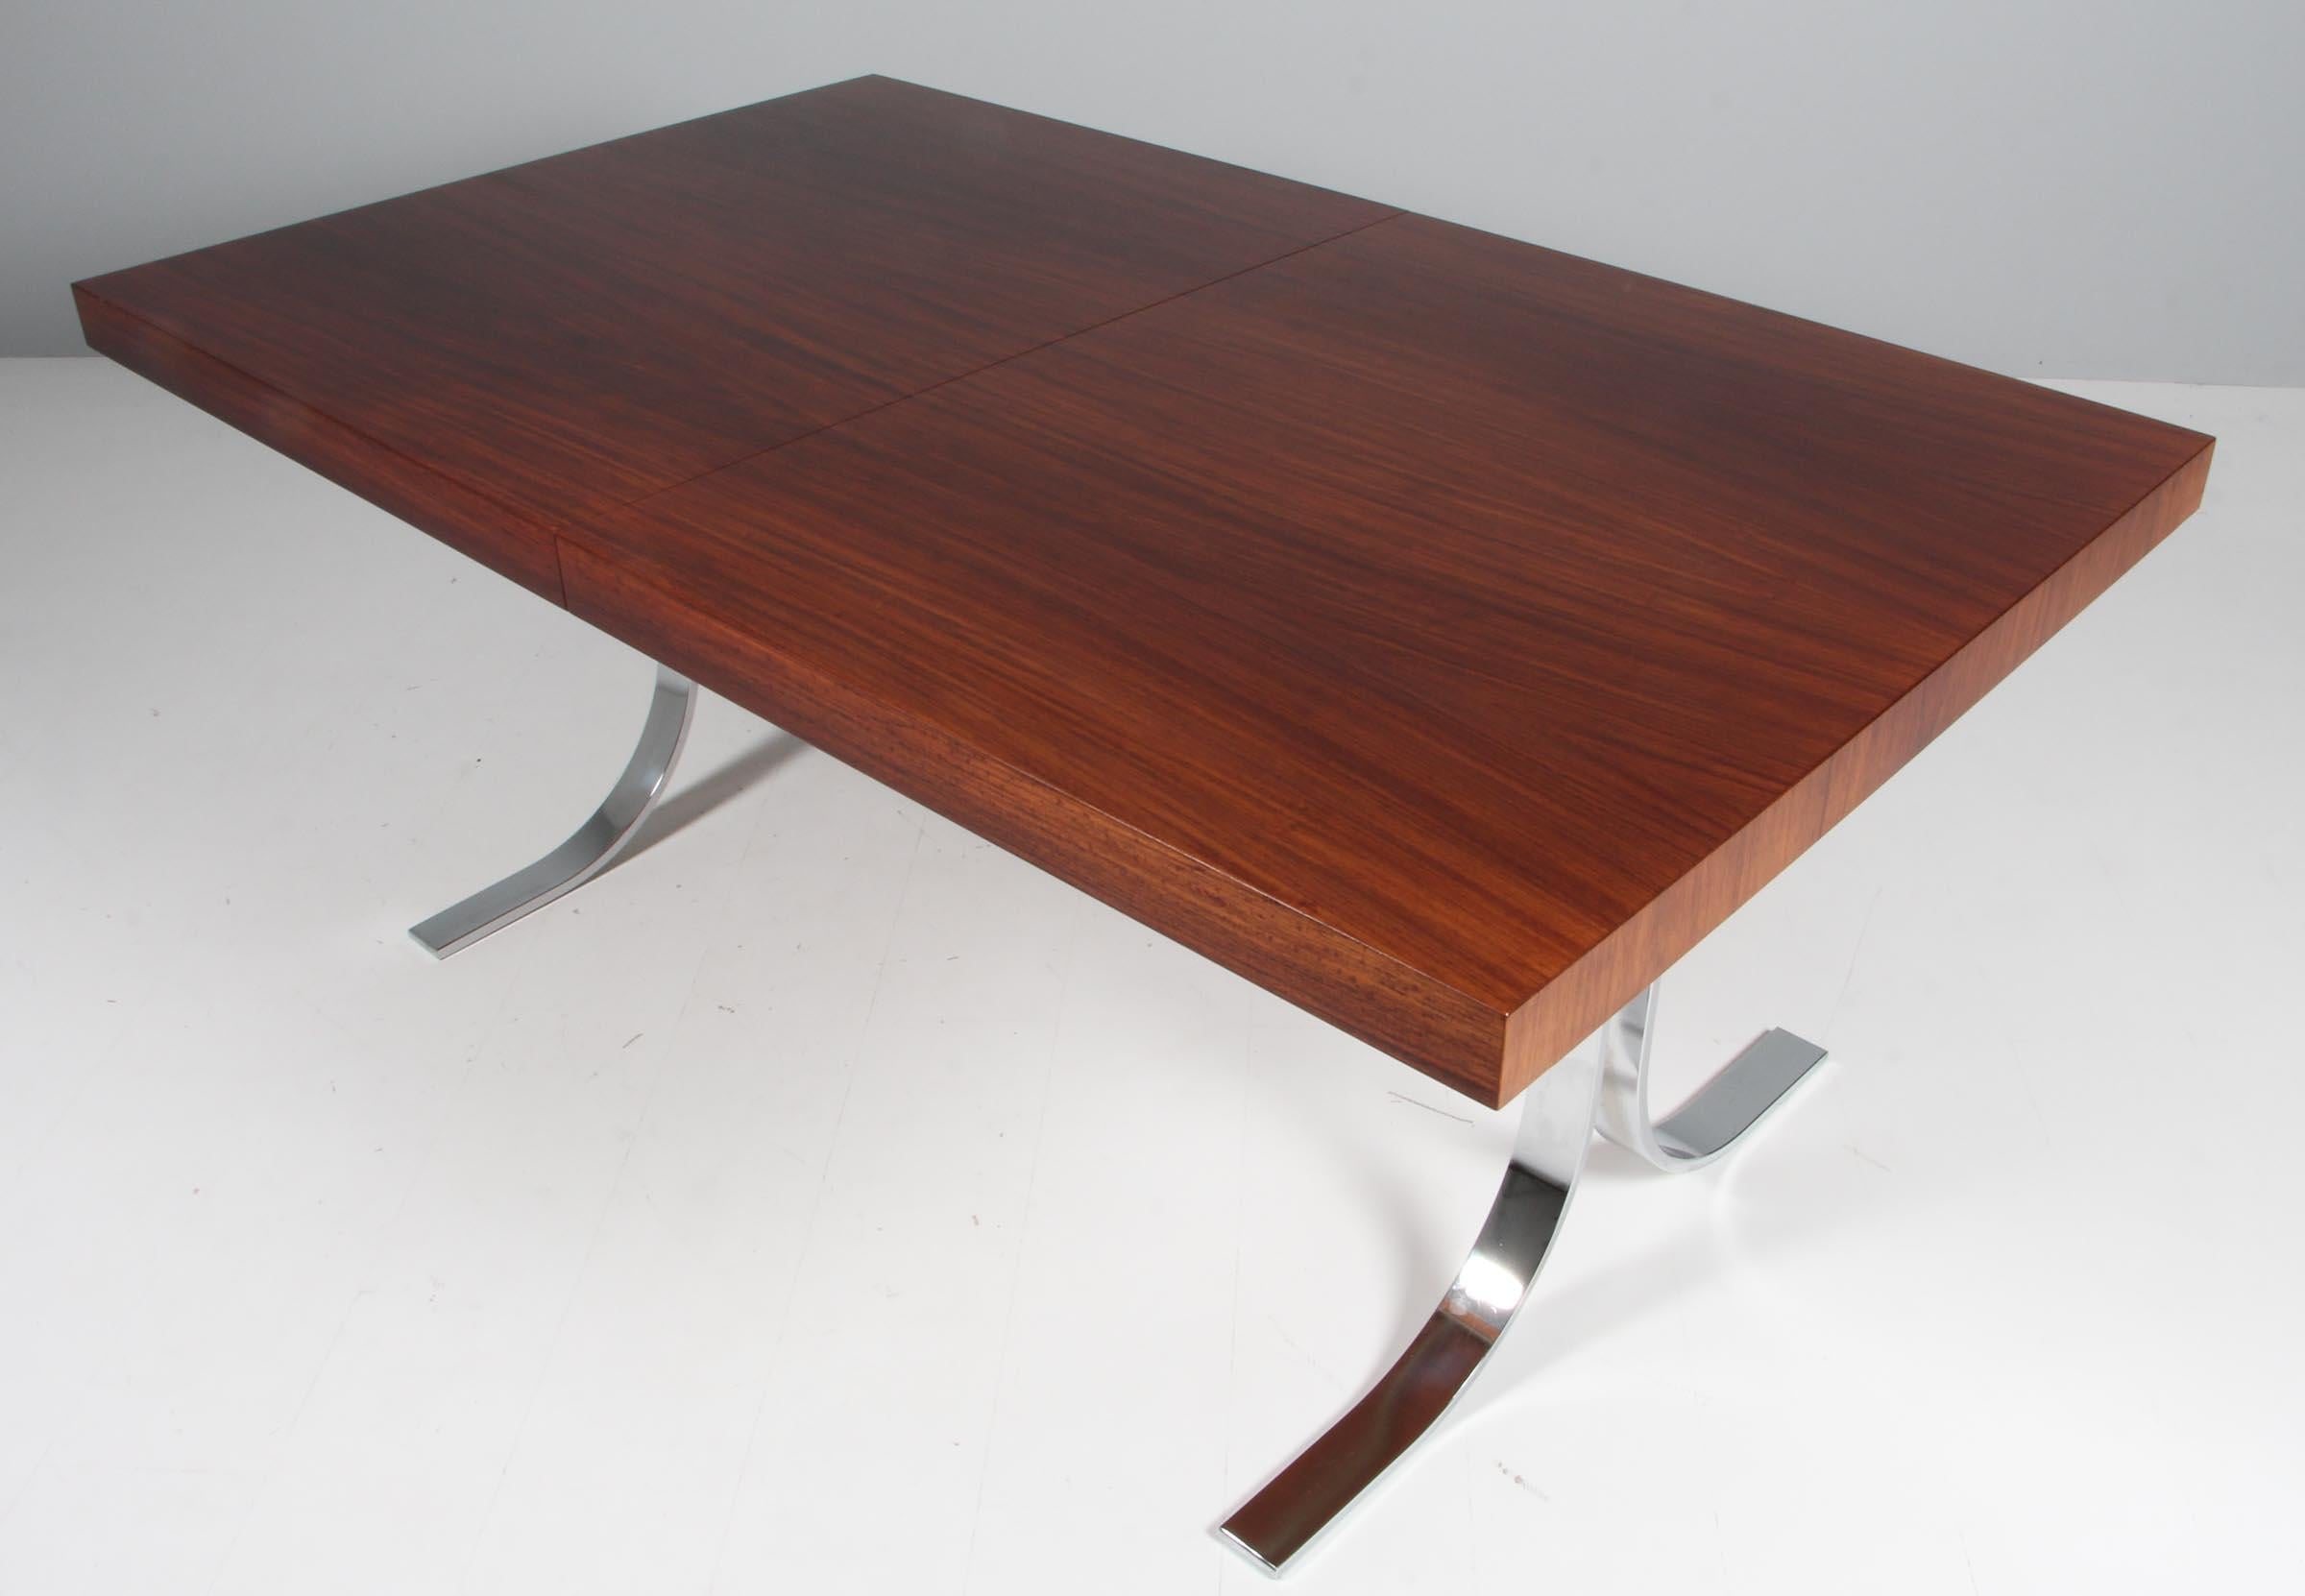 Poul Nørreklit dining table in rosewood with one extension leaf.

Frame of chromed steel.